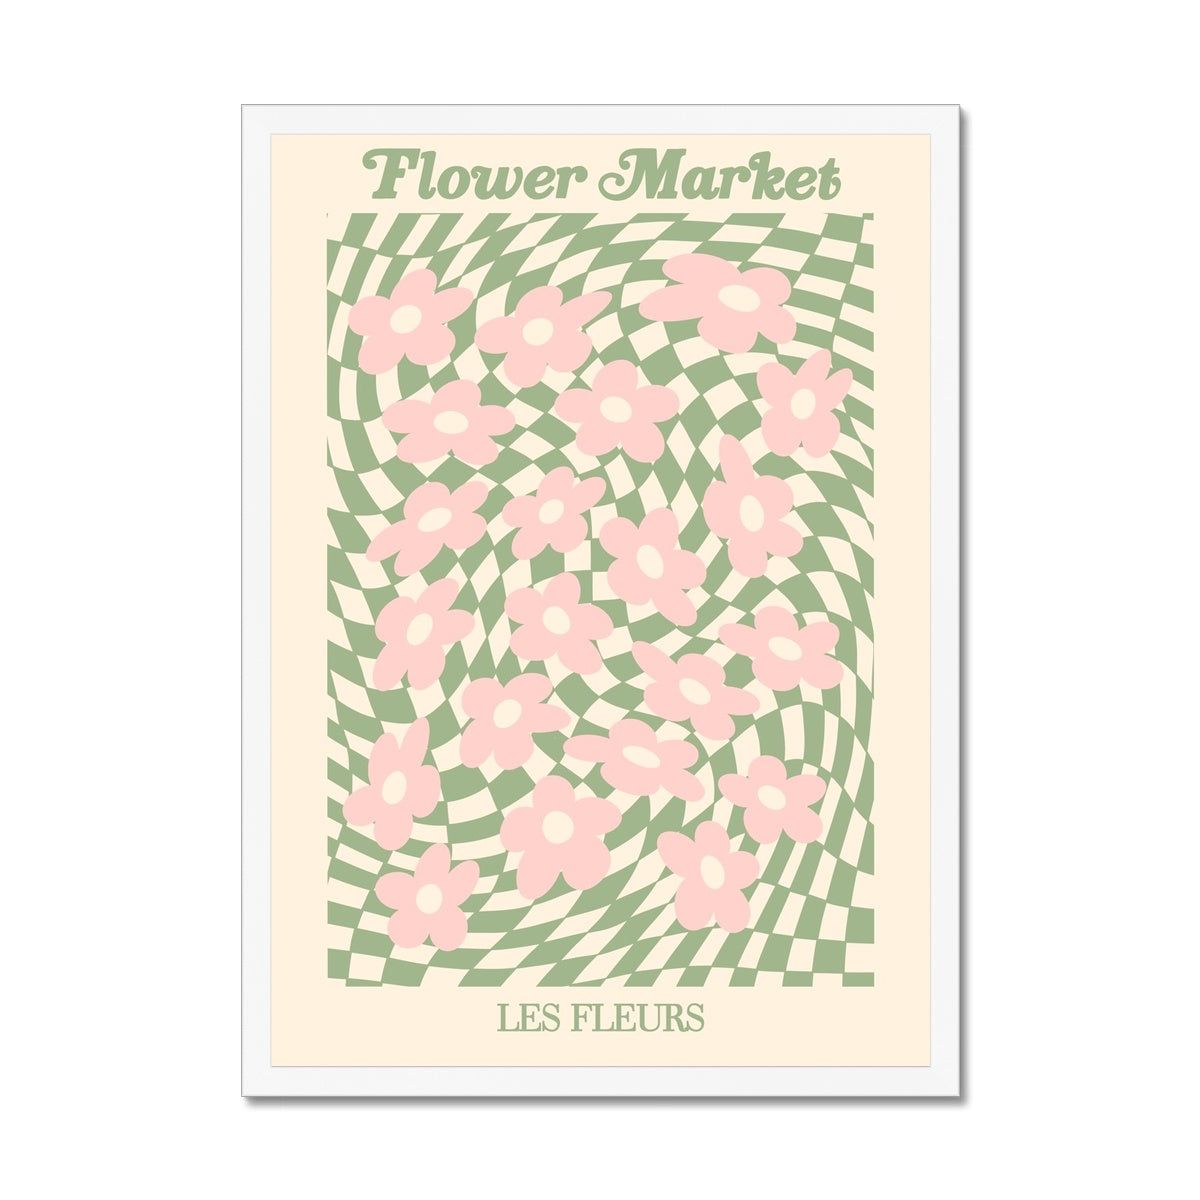 © les muses / Our Flower Market / Psychedelic collection features wall art with checkered floral daisy illustrations under original hand drawn typography, titled Flower Market / Les Fleurs. Danish pastel posters full of checkers and daisies to brighten up any gallery wall.
